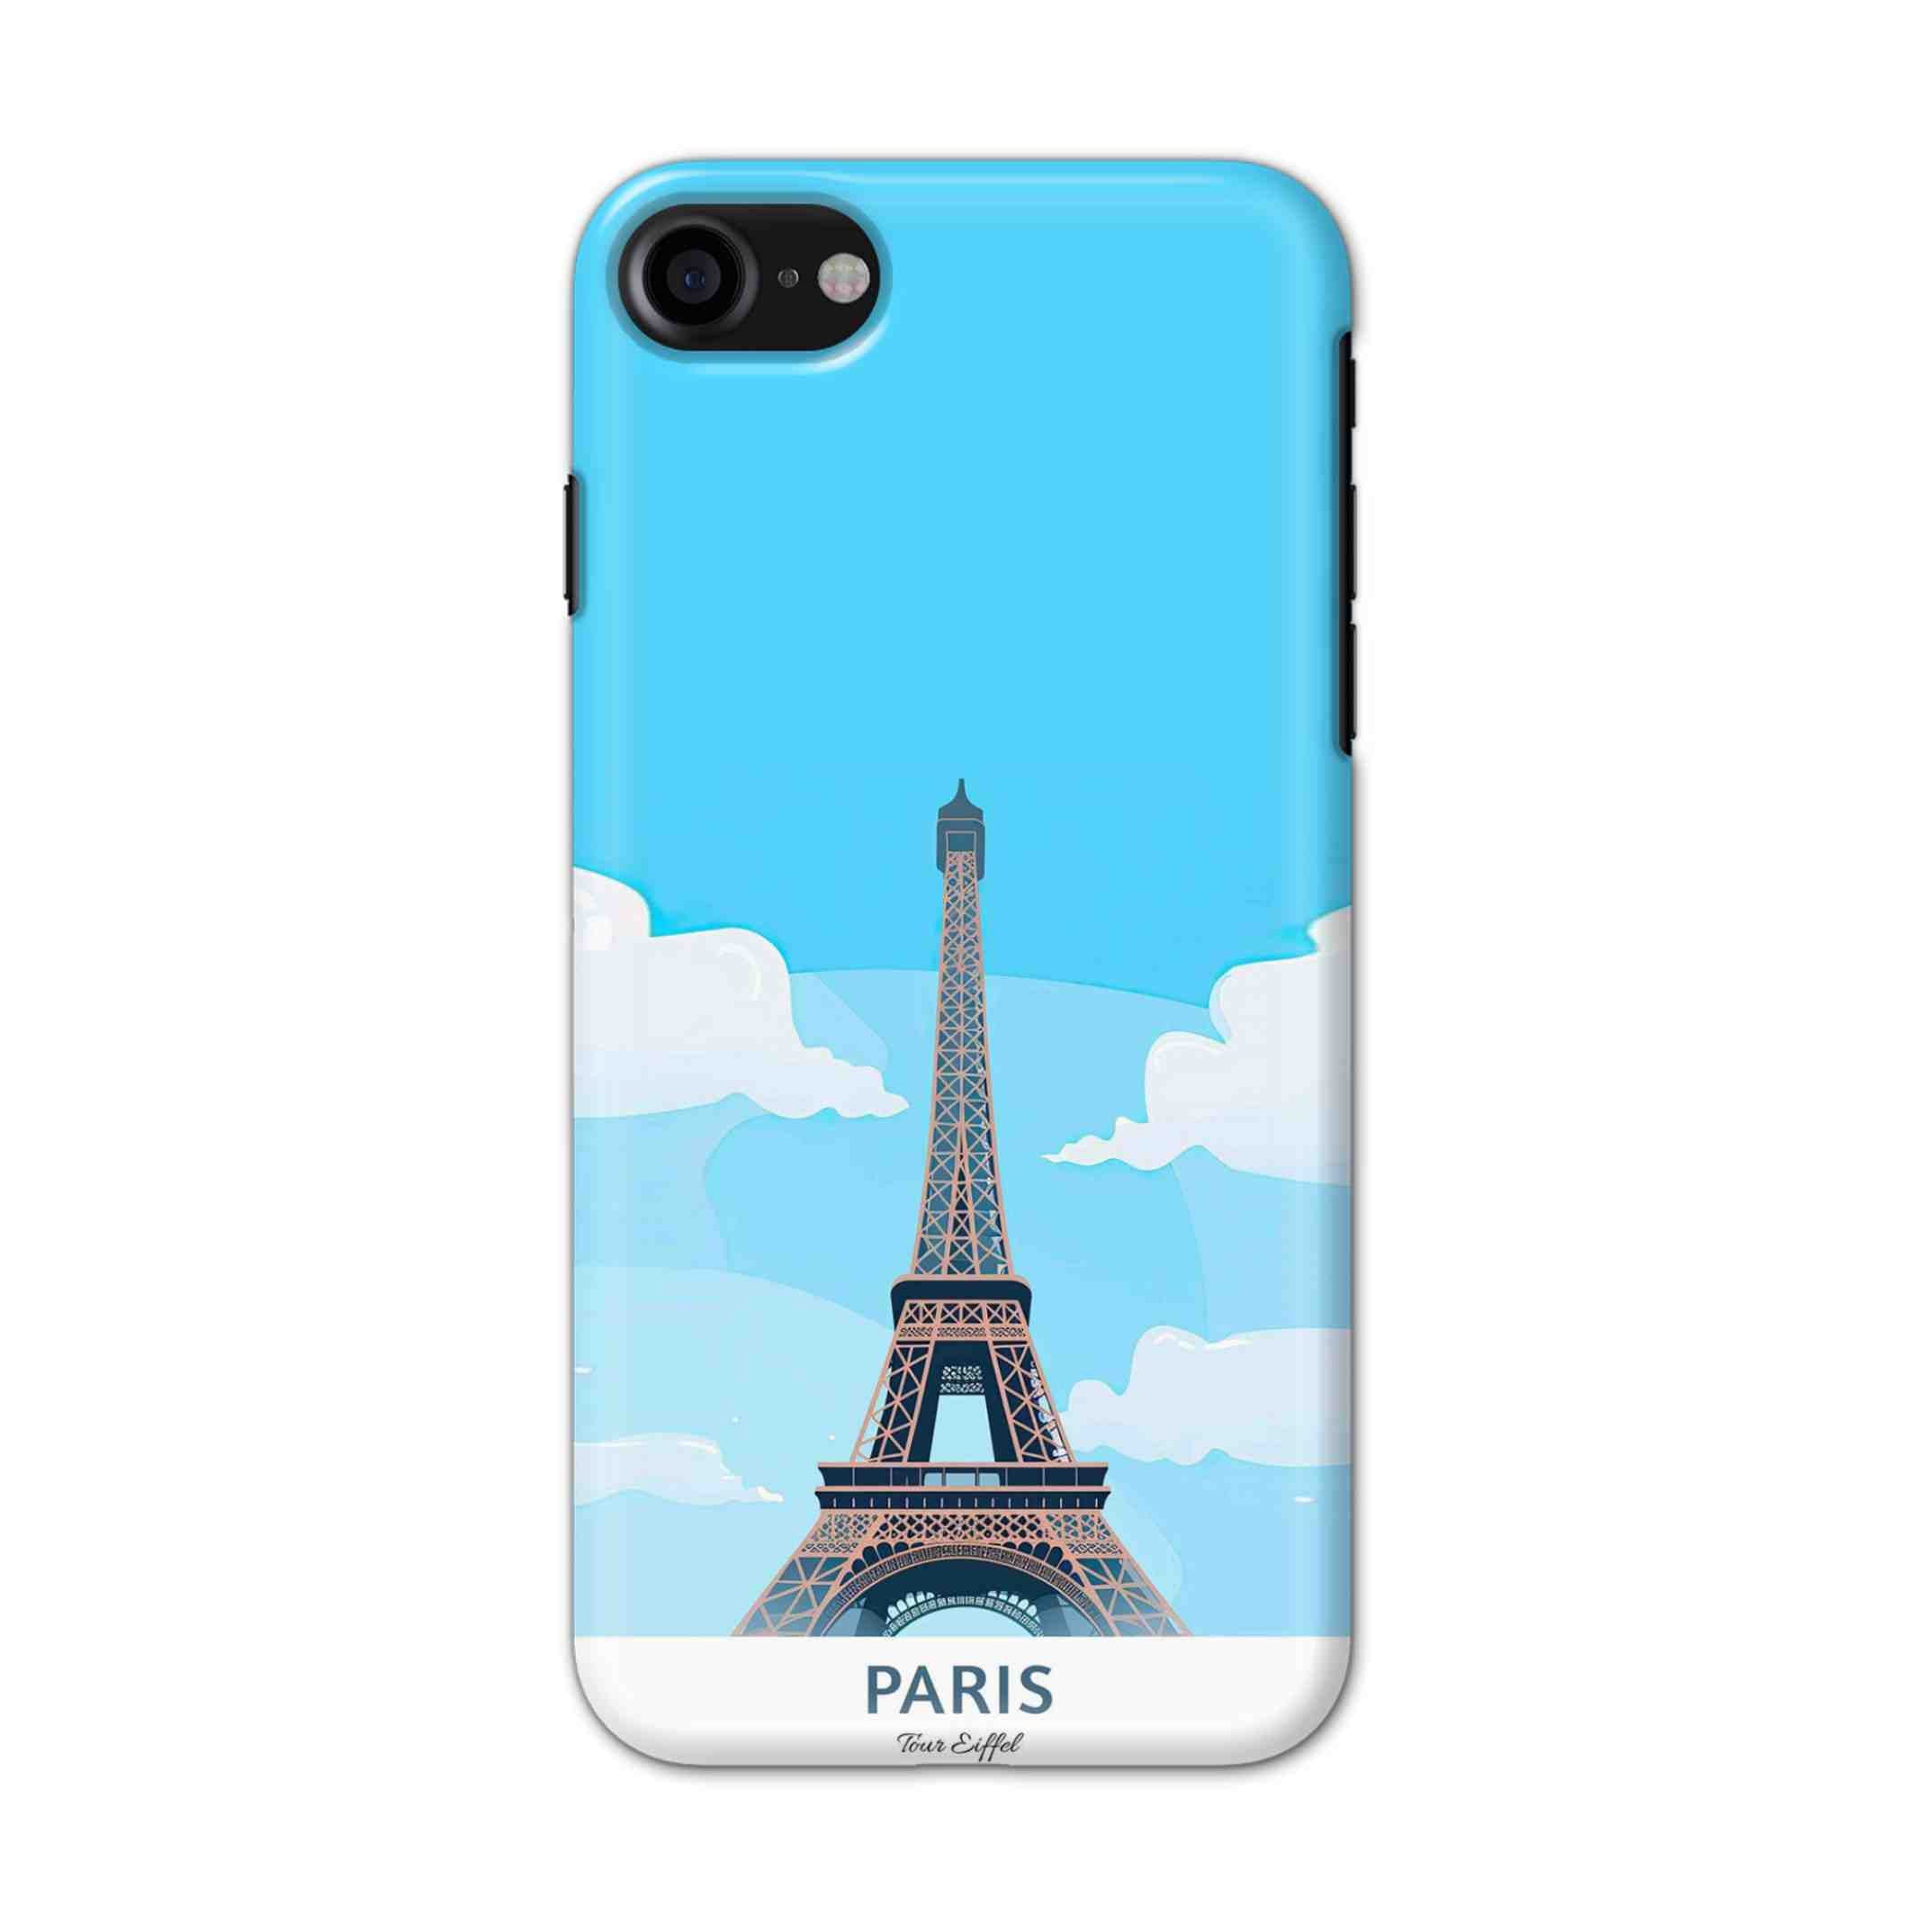 Buy Paris Hard Back Mobile Phone Case/Cover For iPhone 7 / 8 Online